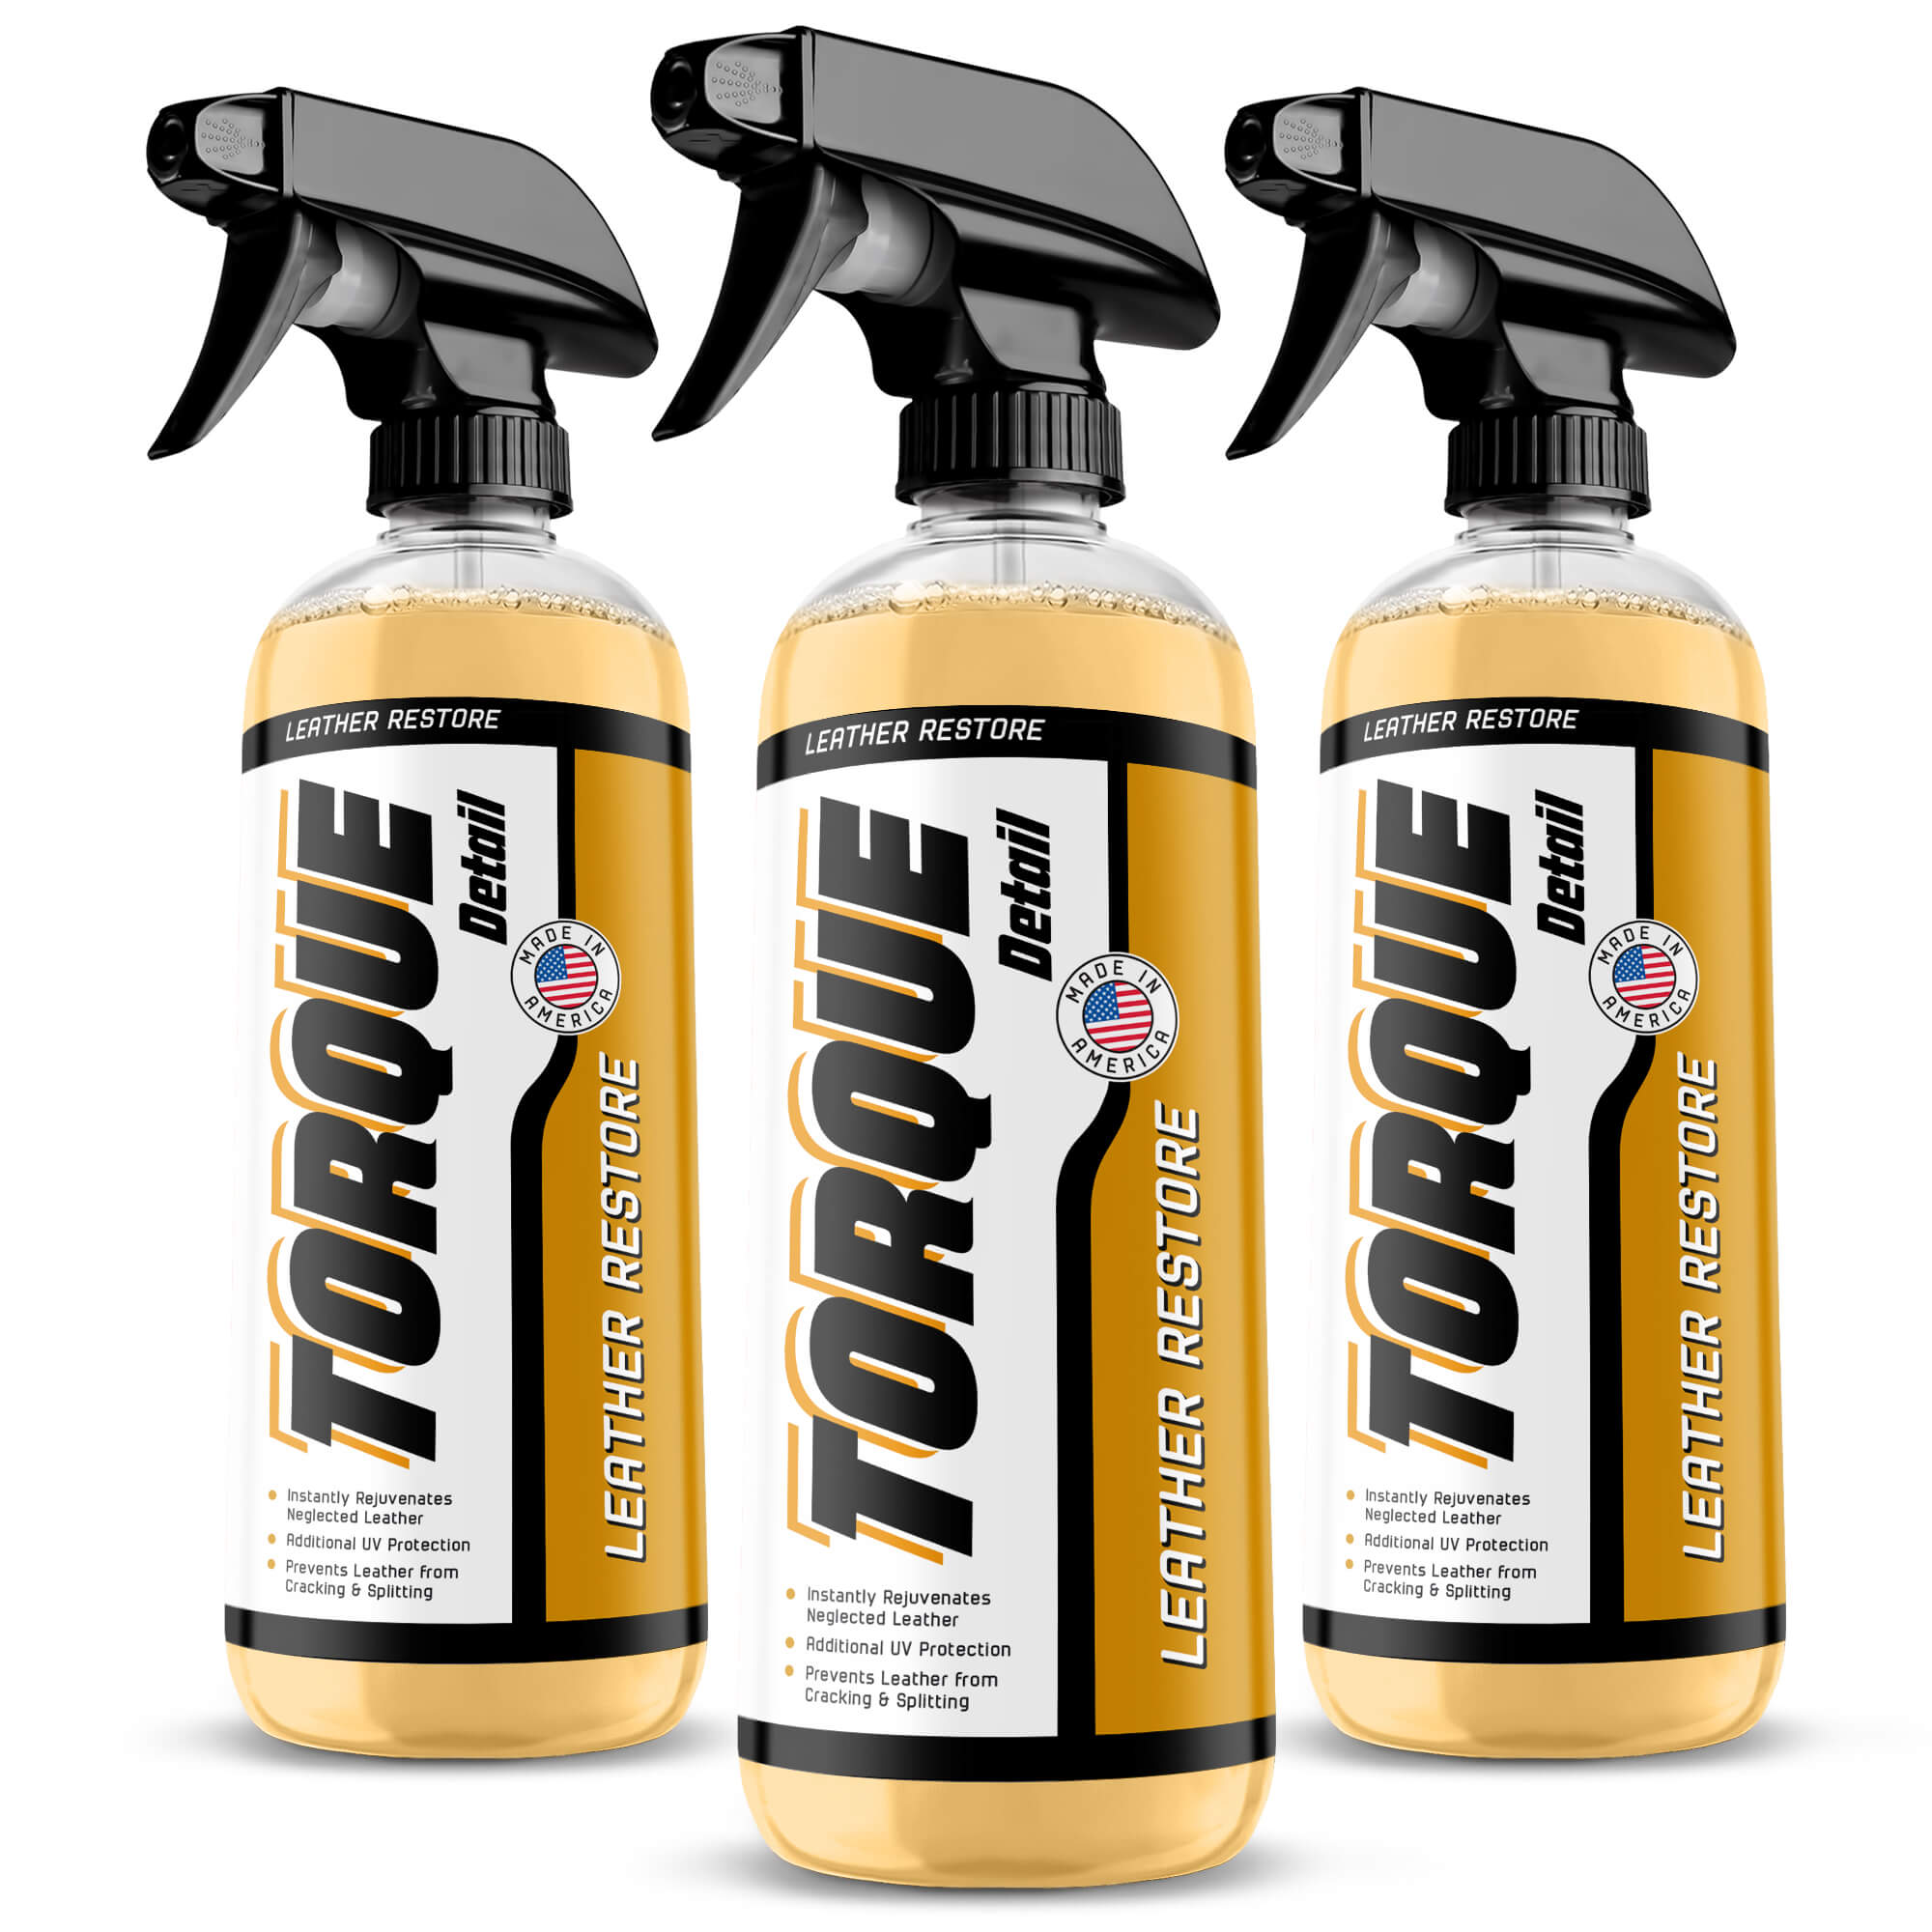 Leather Care and Cleaner Turtle Wax Hybrid Solutions Leather Mist